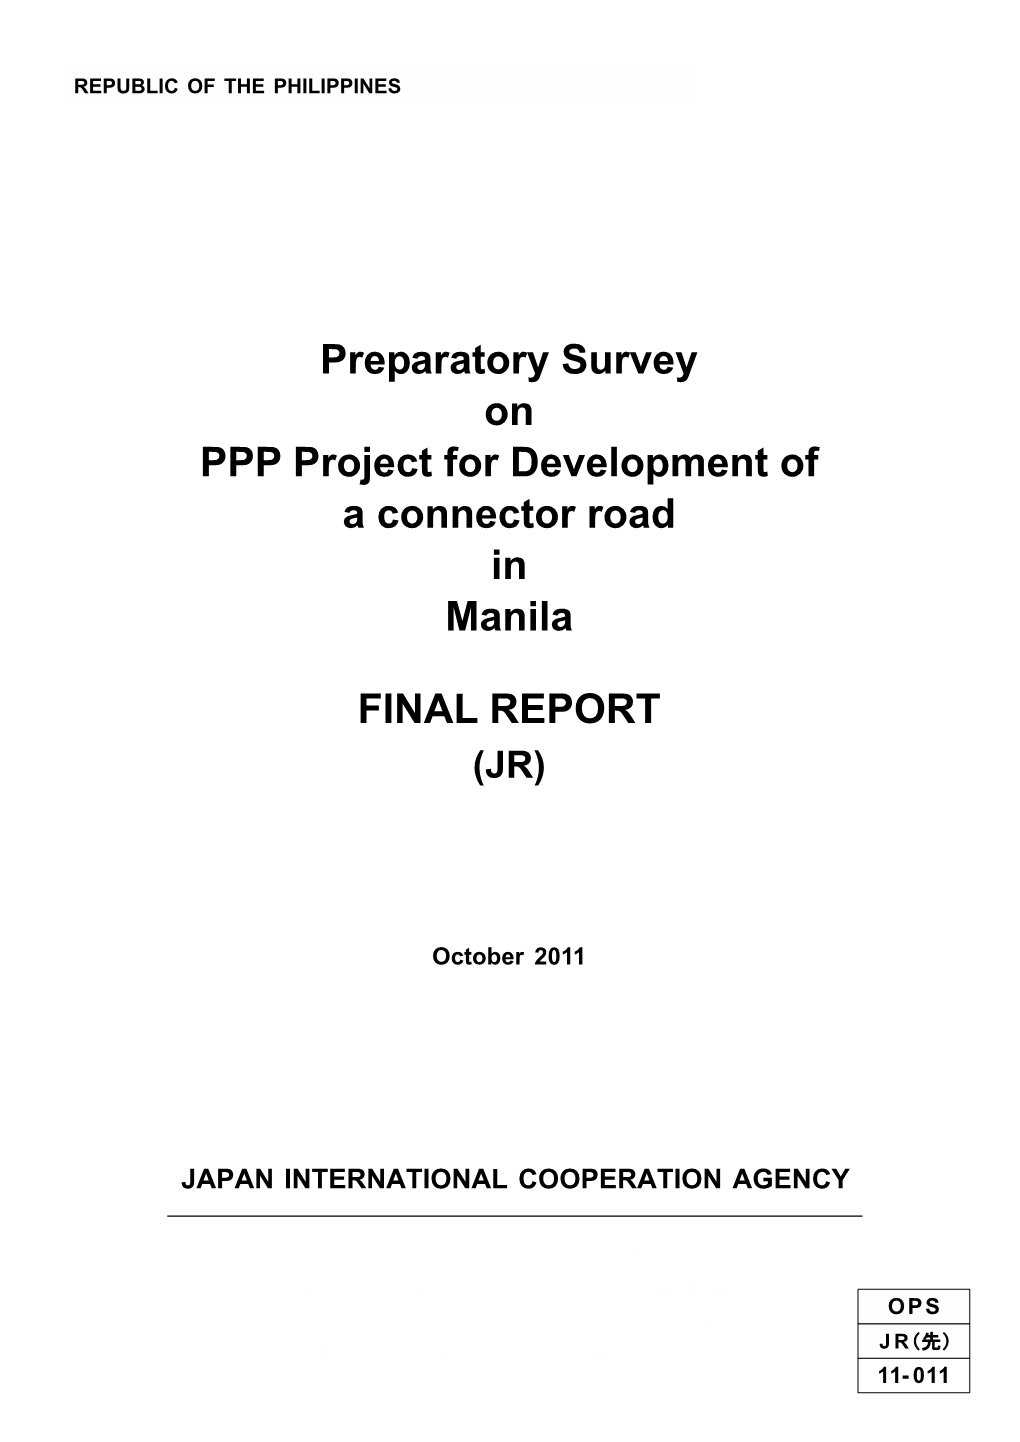 Preparatory Survey on PPP Project for Development of a Connector Road in Manila